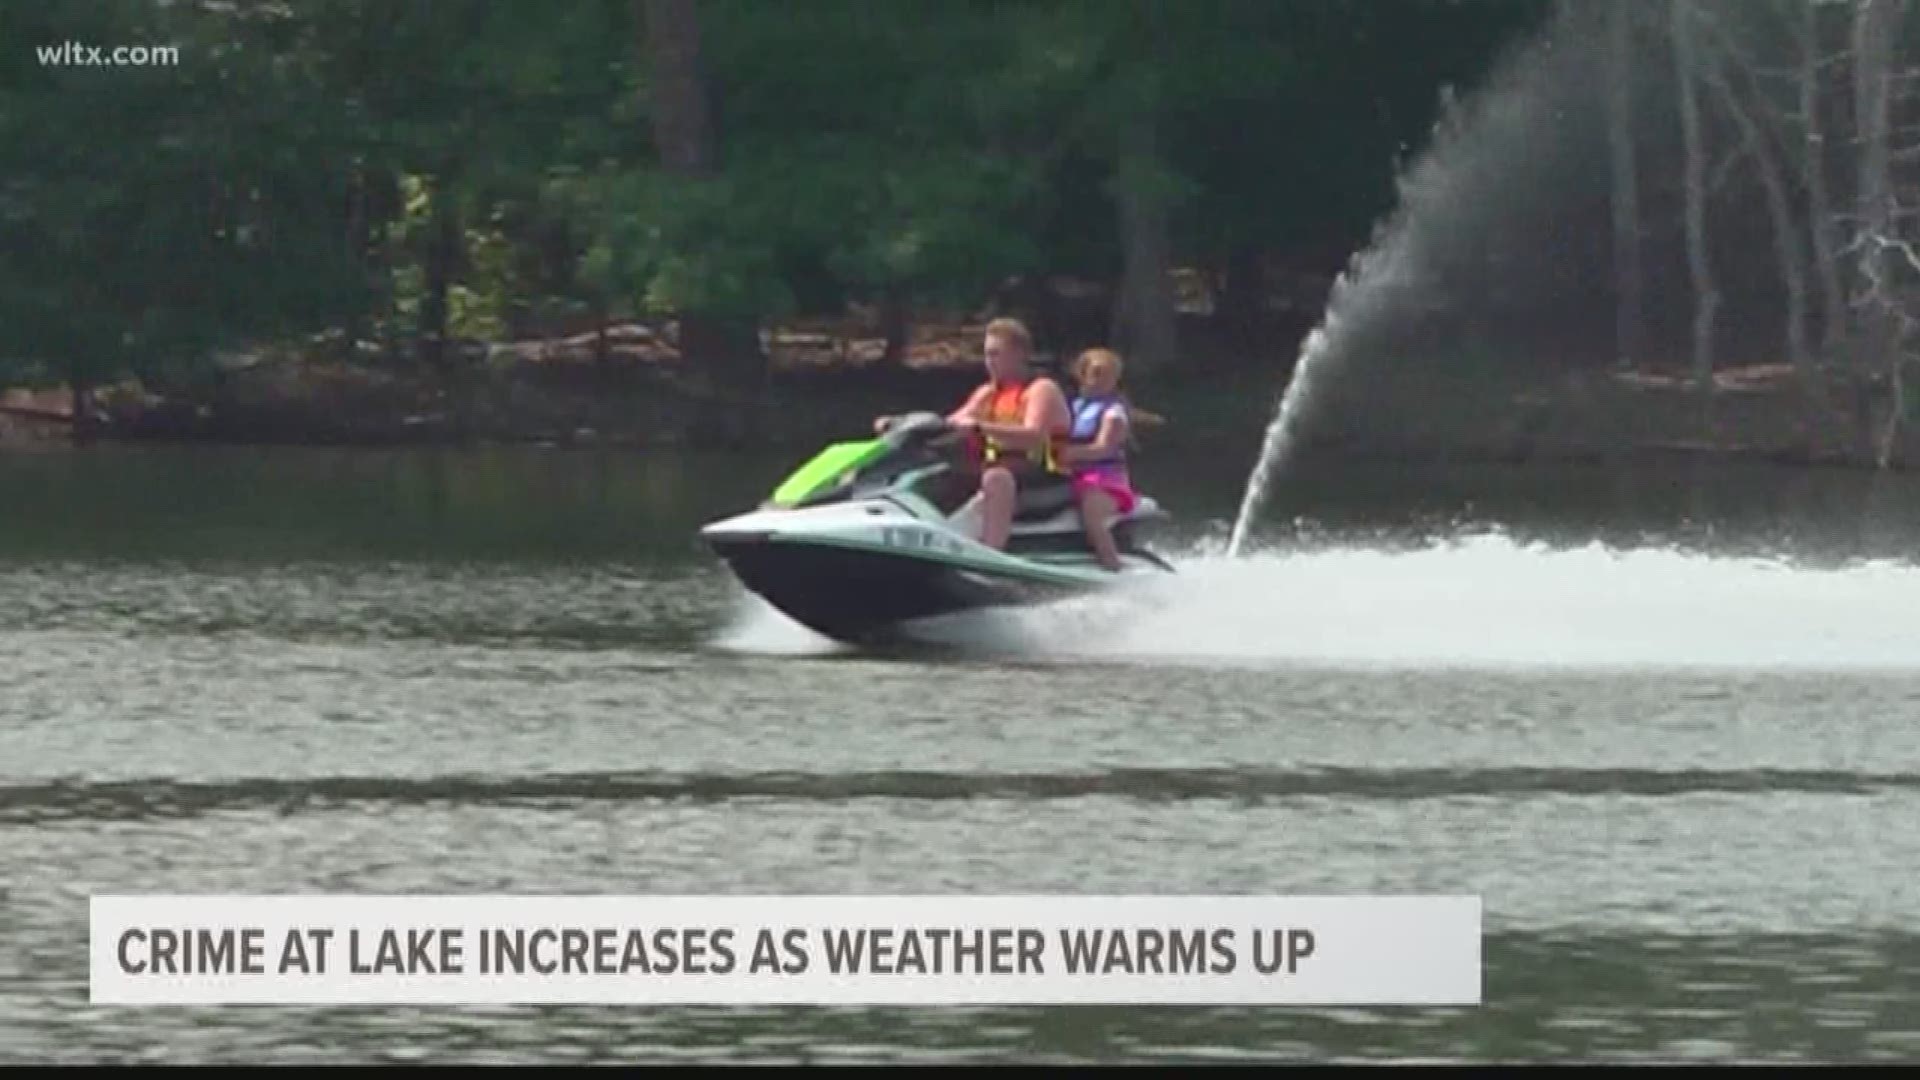 We're beginning to see more crime around Lake Murray as the weather continues to heat up.